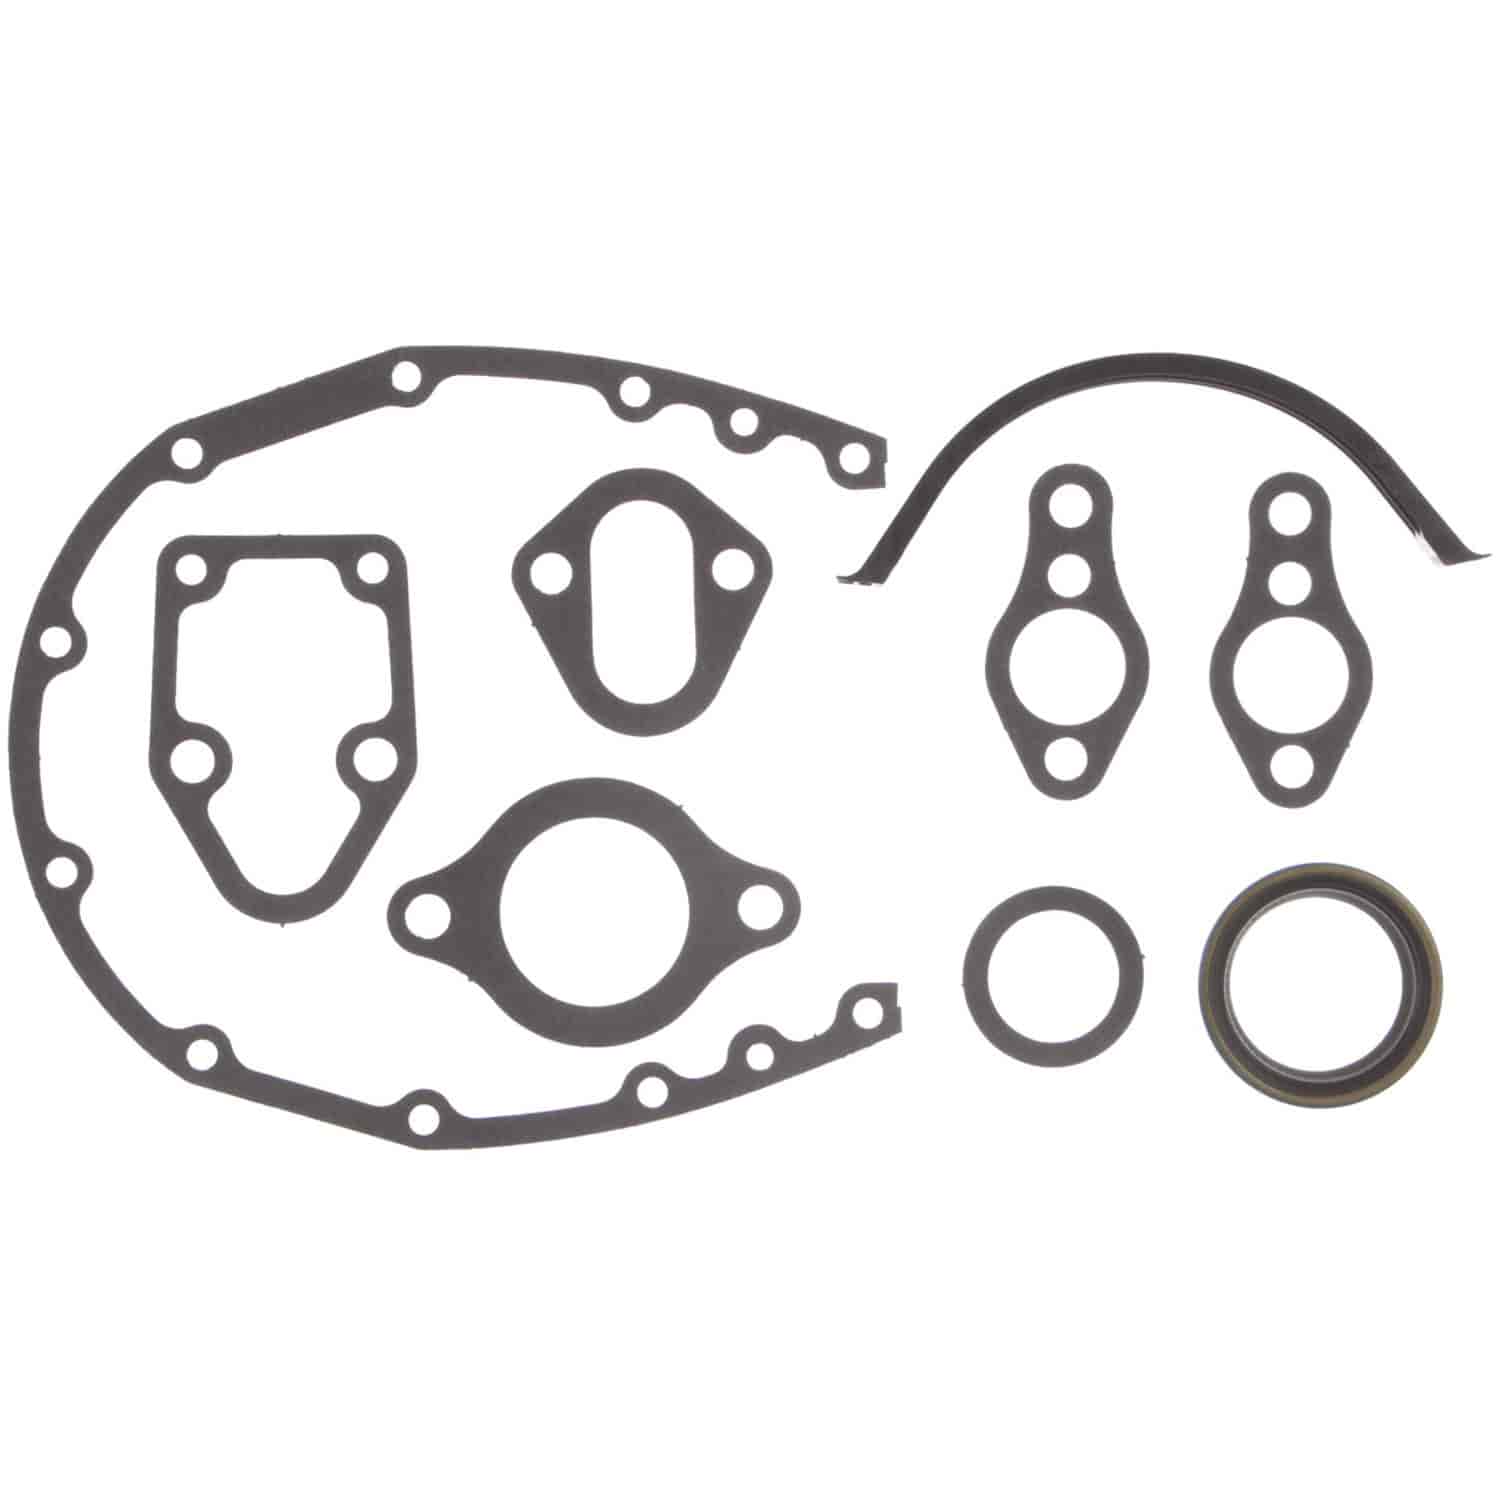 Timing Cover Gasket Set 1955-1974 Small Block Chevy 265/283/302/307/327/350/400